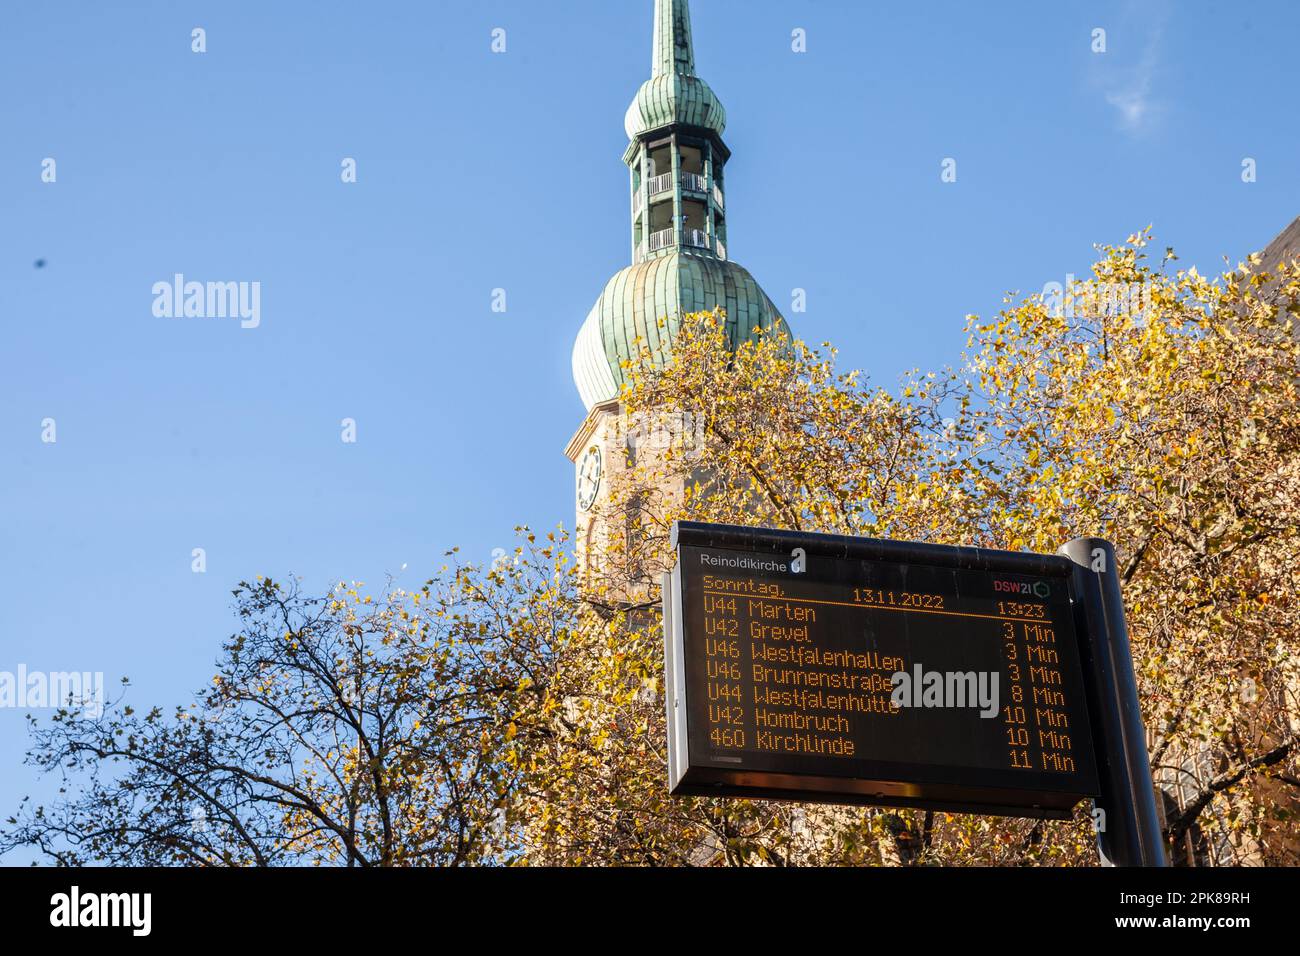 Picture of the departures board of a tram station of dortmunder stadtbahn in the city center of the city. The Dortmund Stadtbahn is a light rail syste Stock Photo